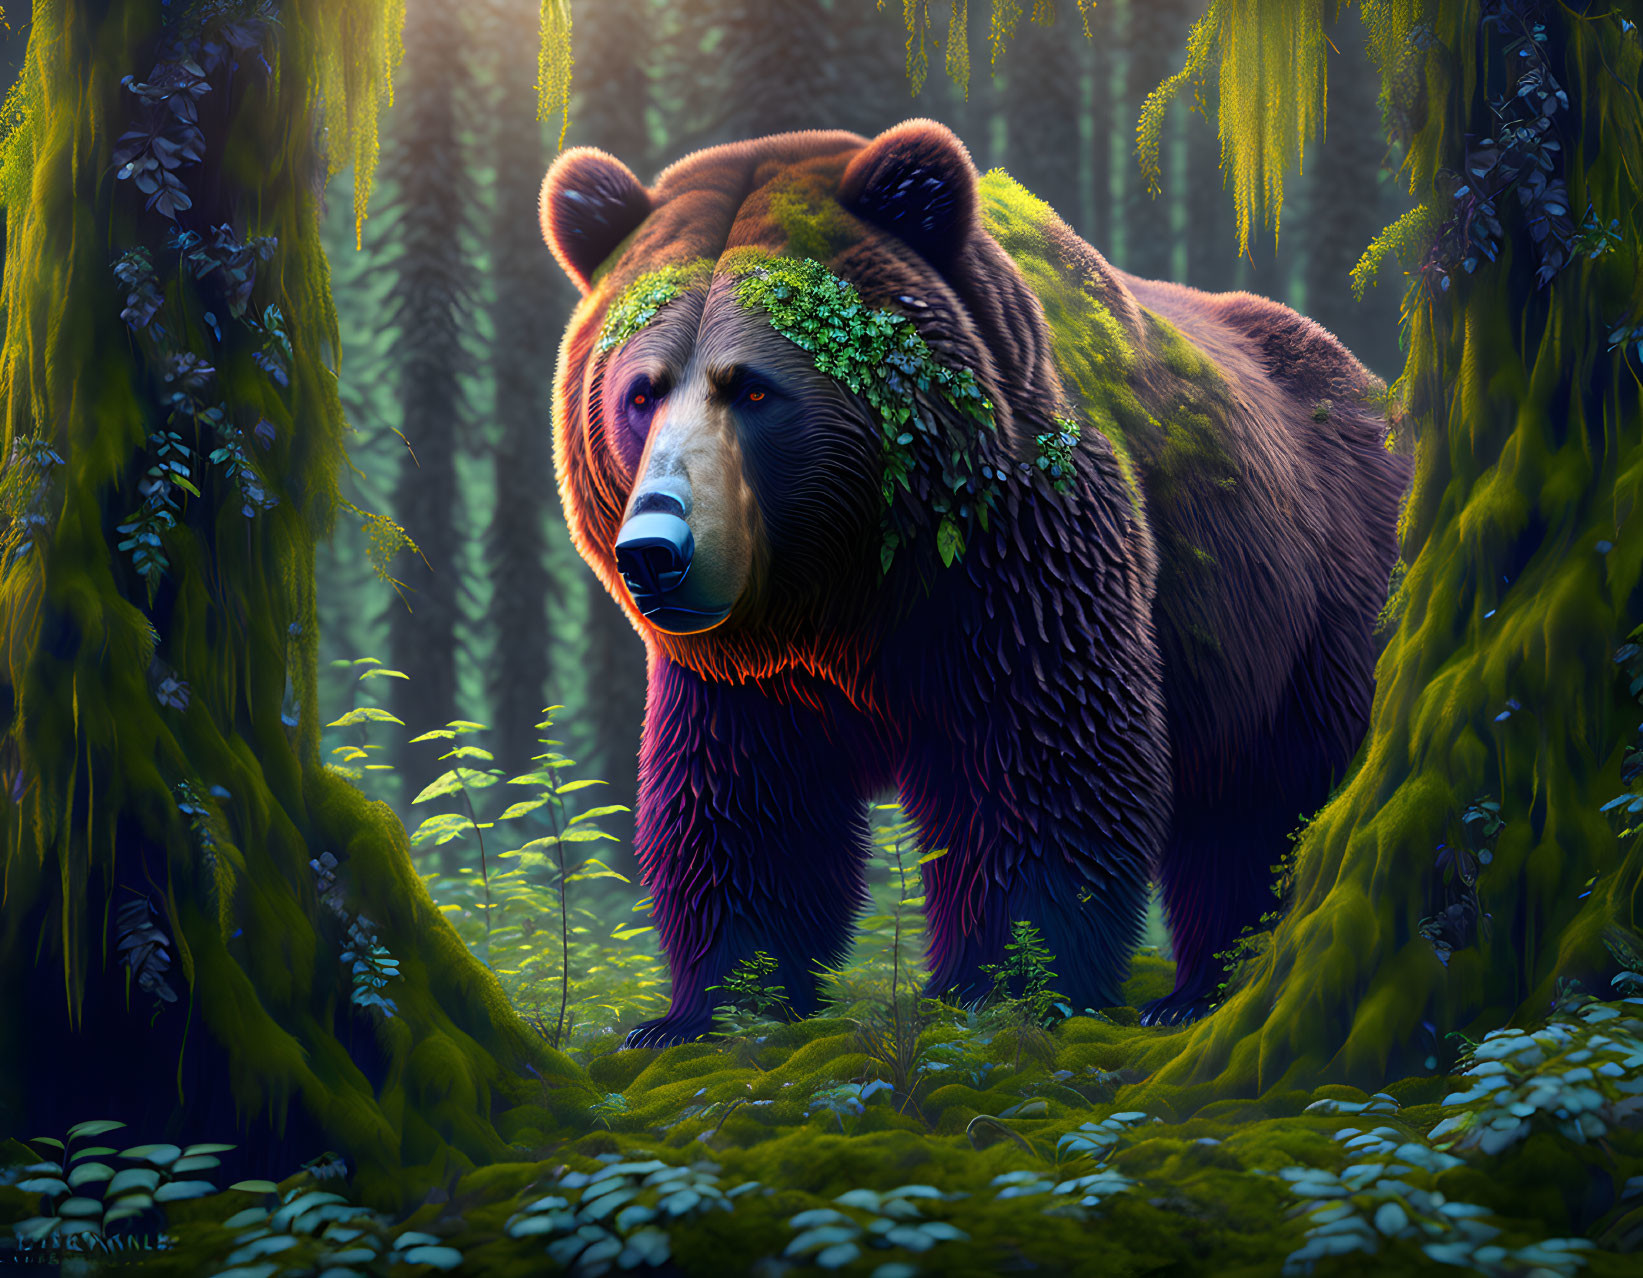 Brown Bear in Moss-Covered Forest with Green Foliage